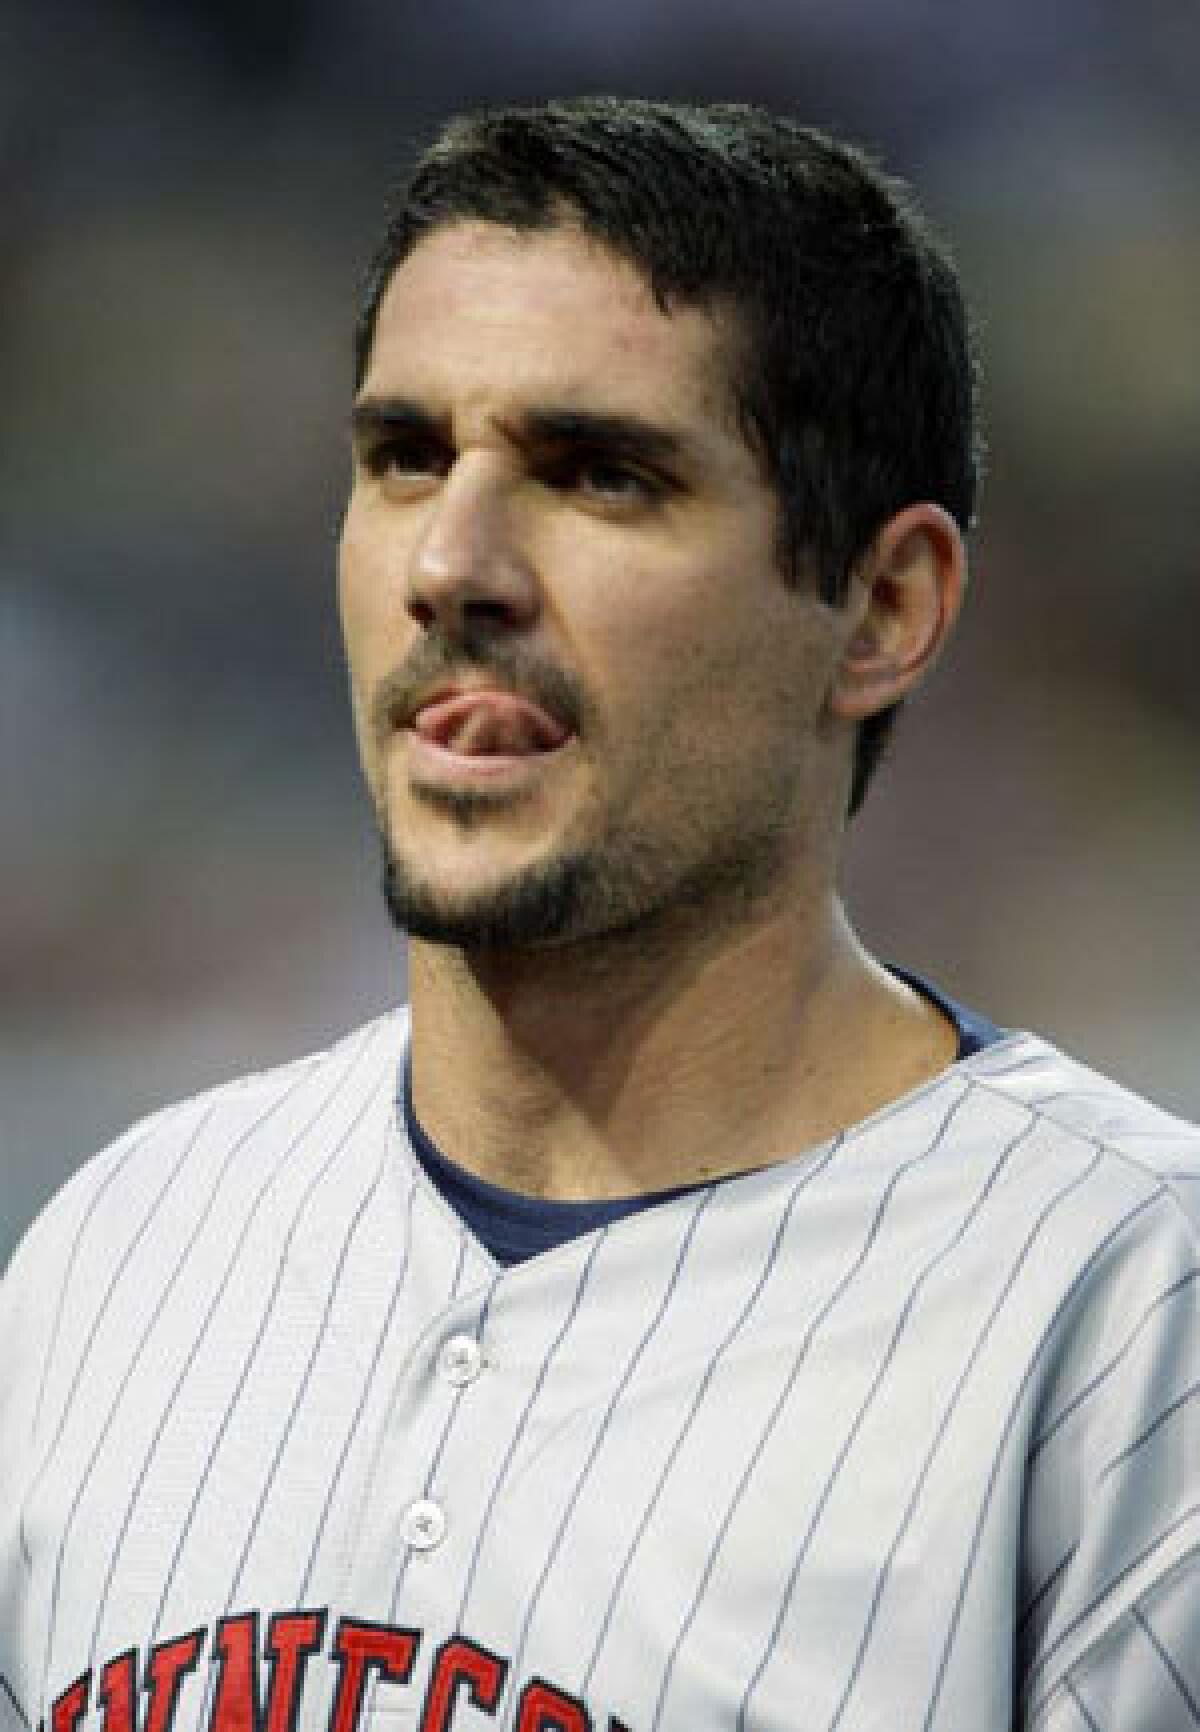 Carl Pavano spent the last four seasons with the Minnesota Twins but is a free agent now.